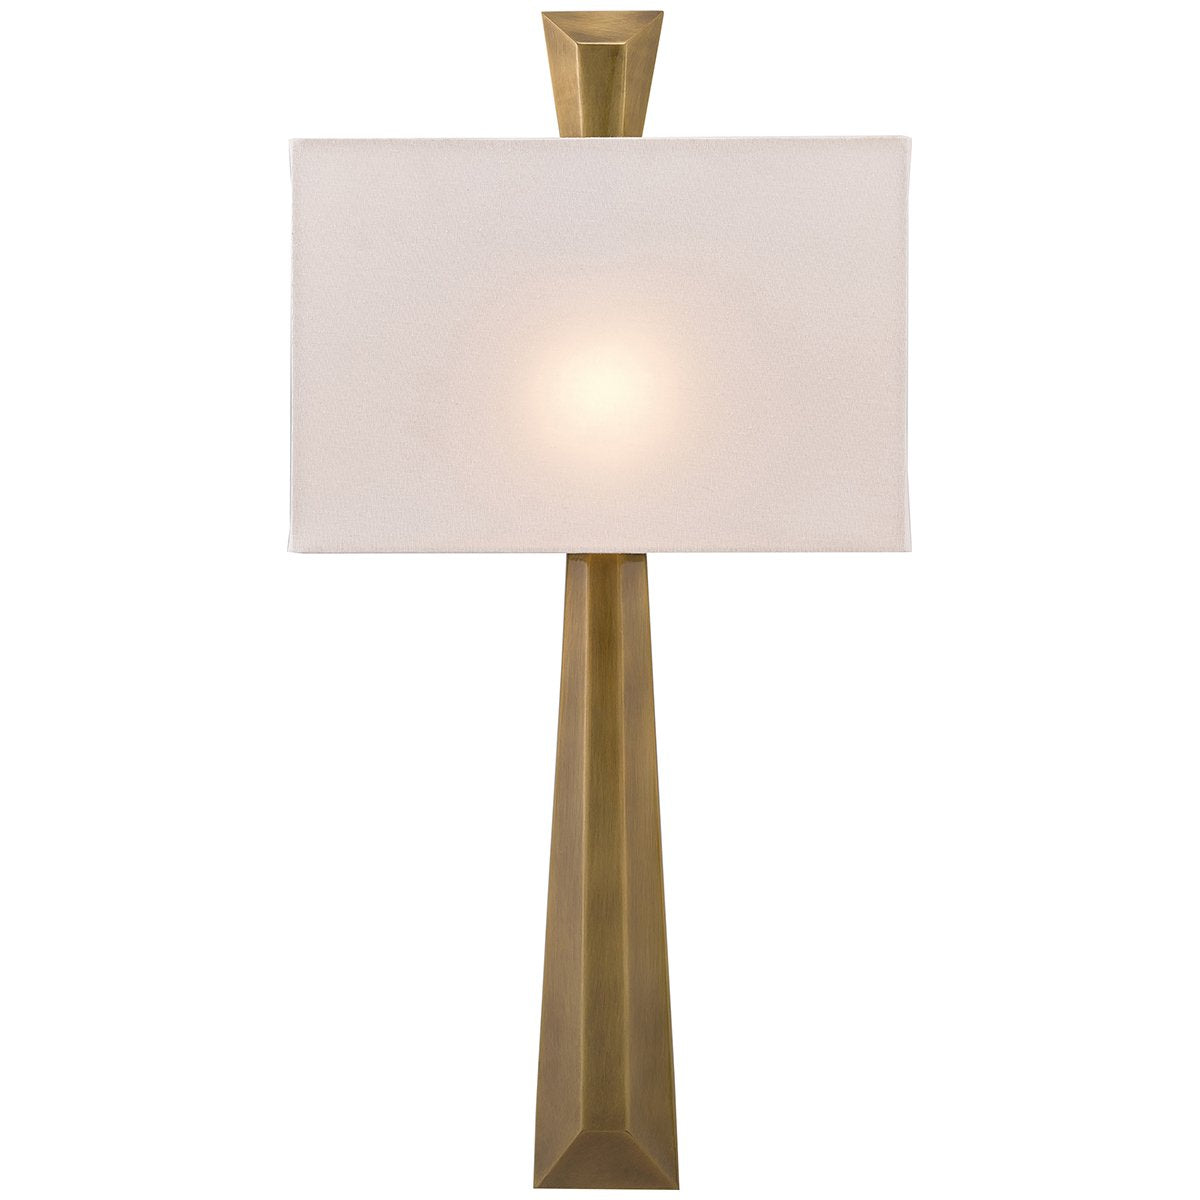 Currey and Company Arno Wall Sconce